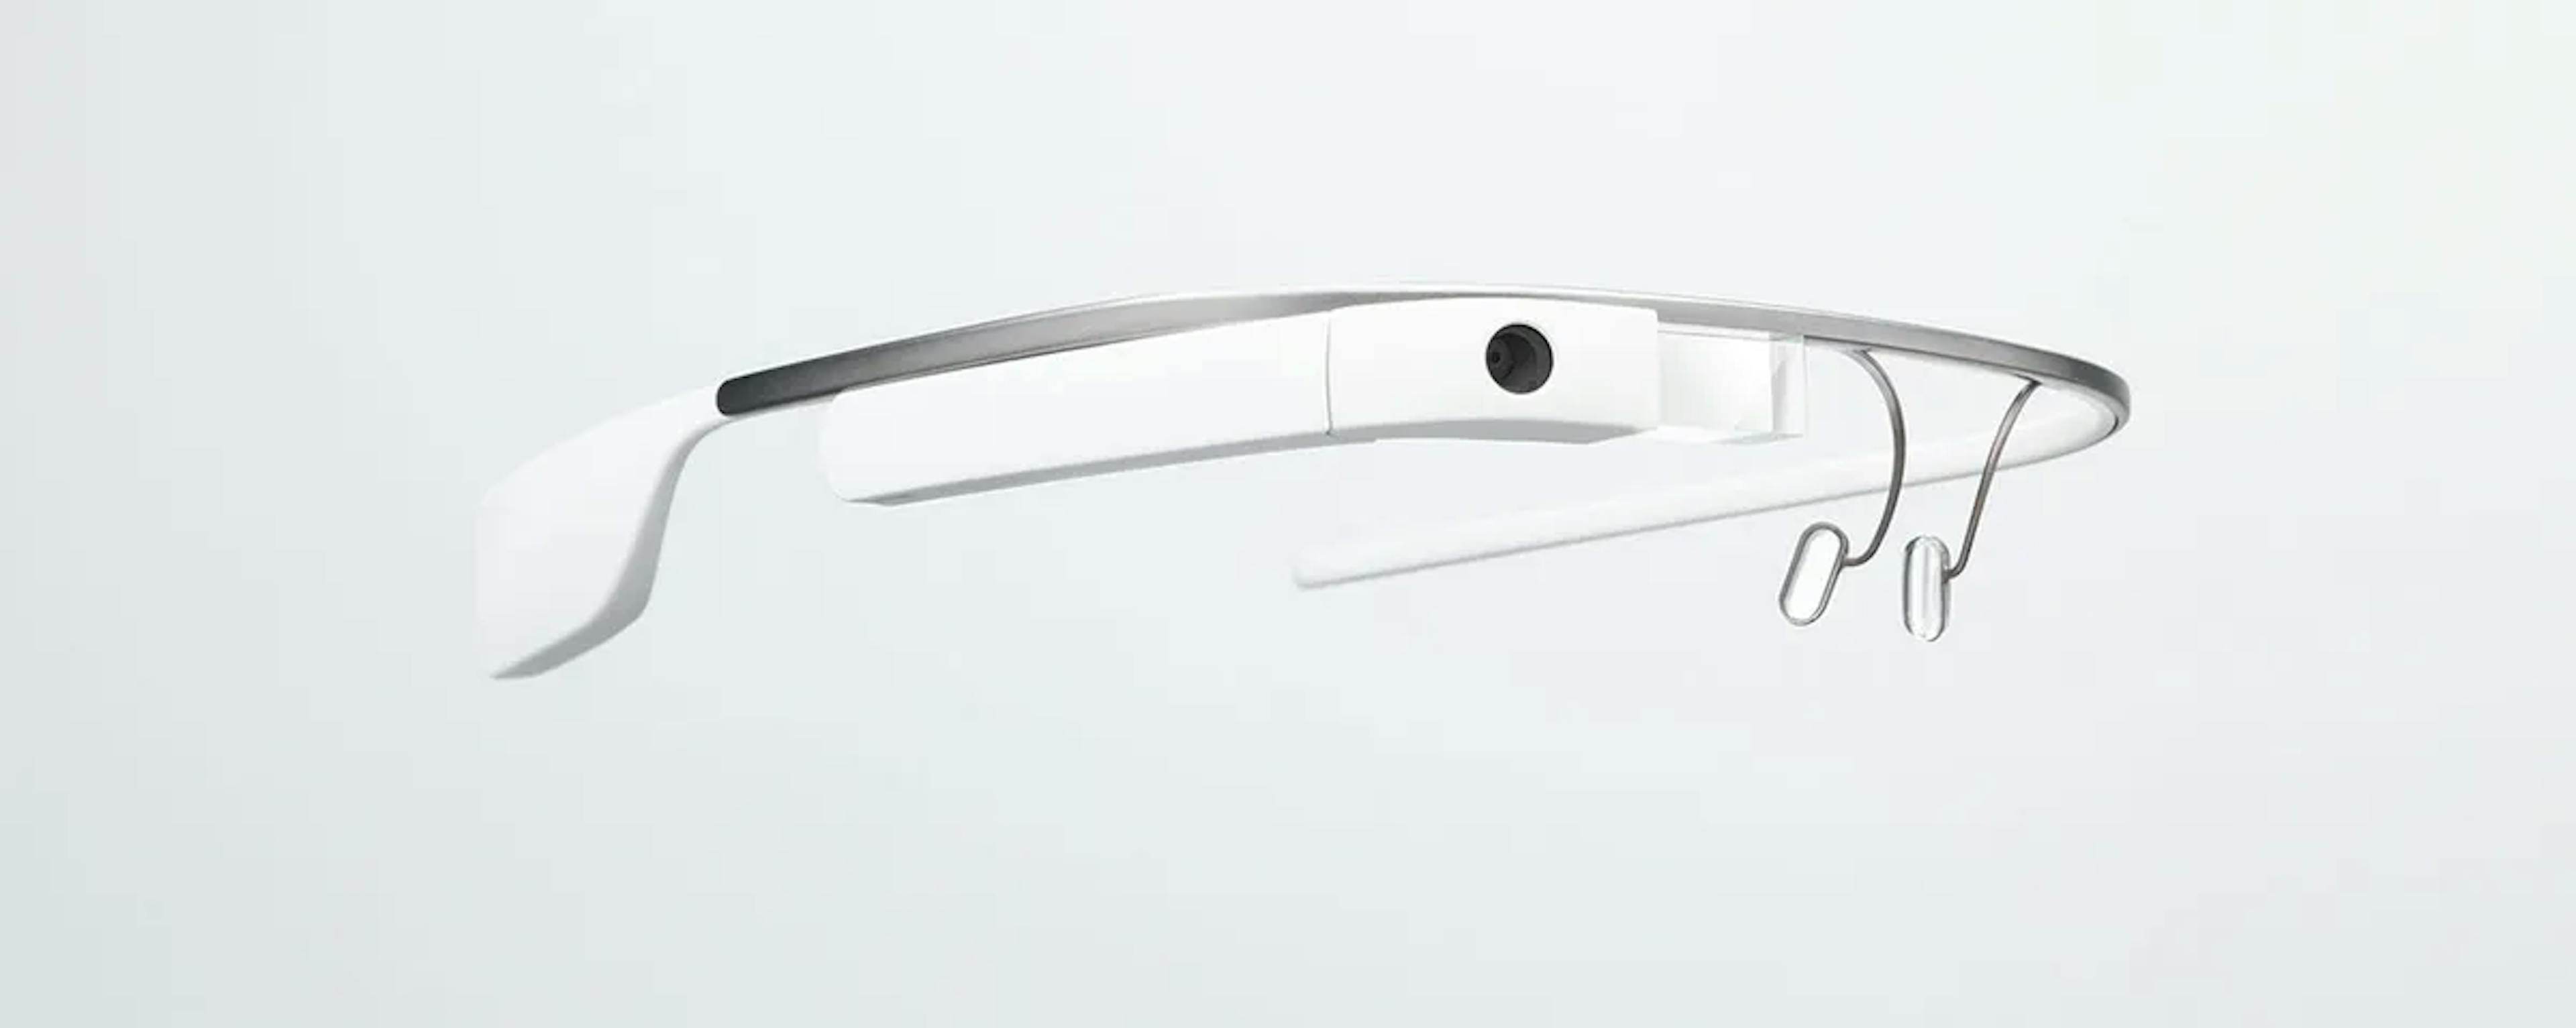  The Google Glass in question